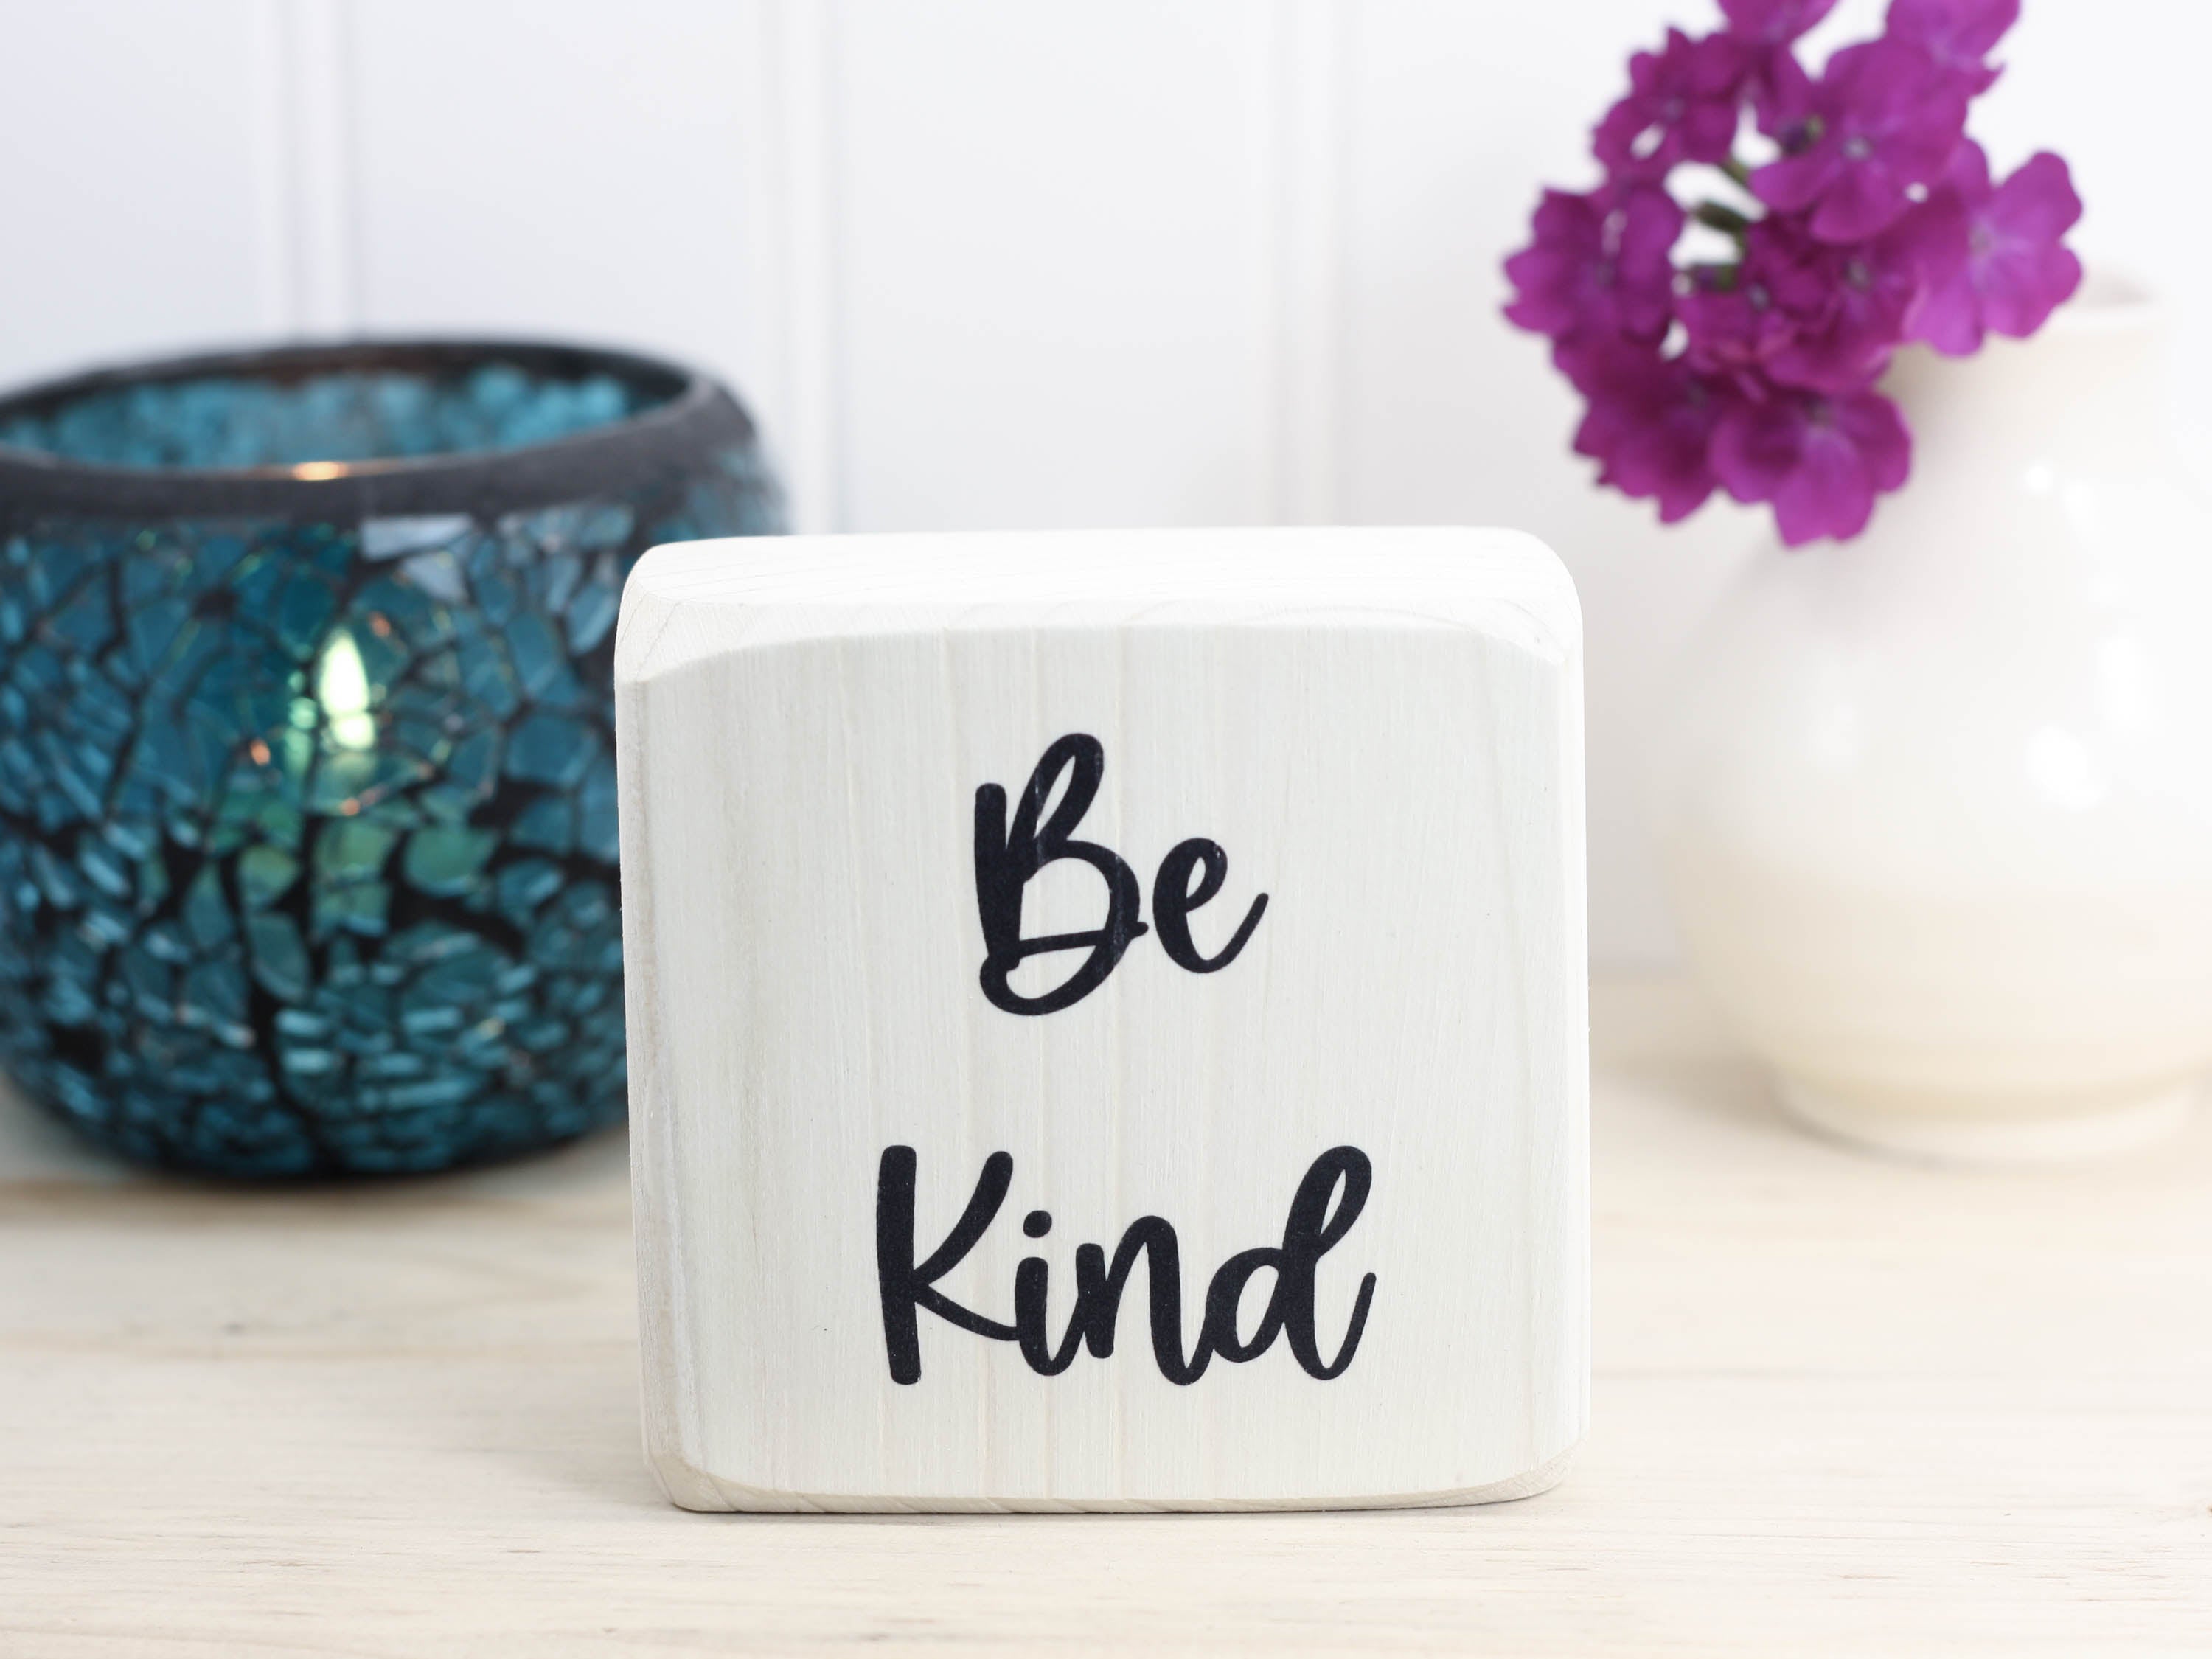 whitewashed small wood sign with the text "be kind"